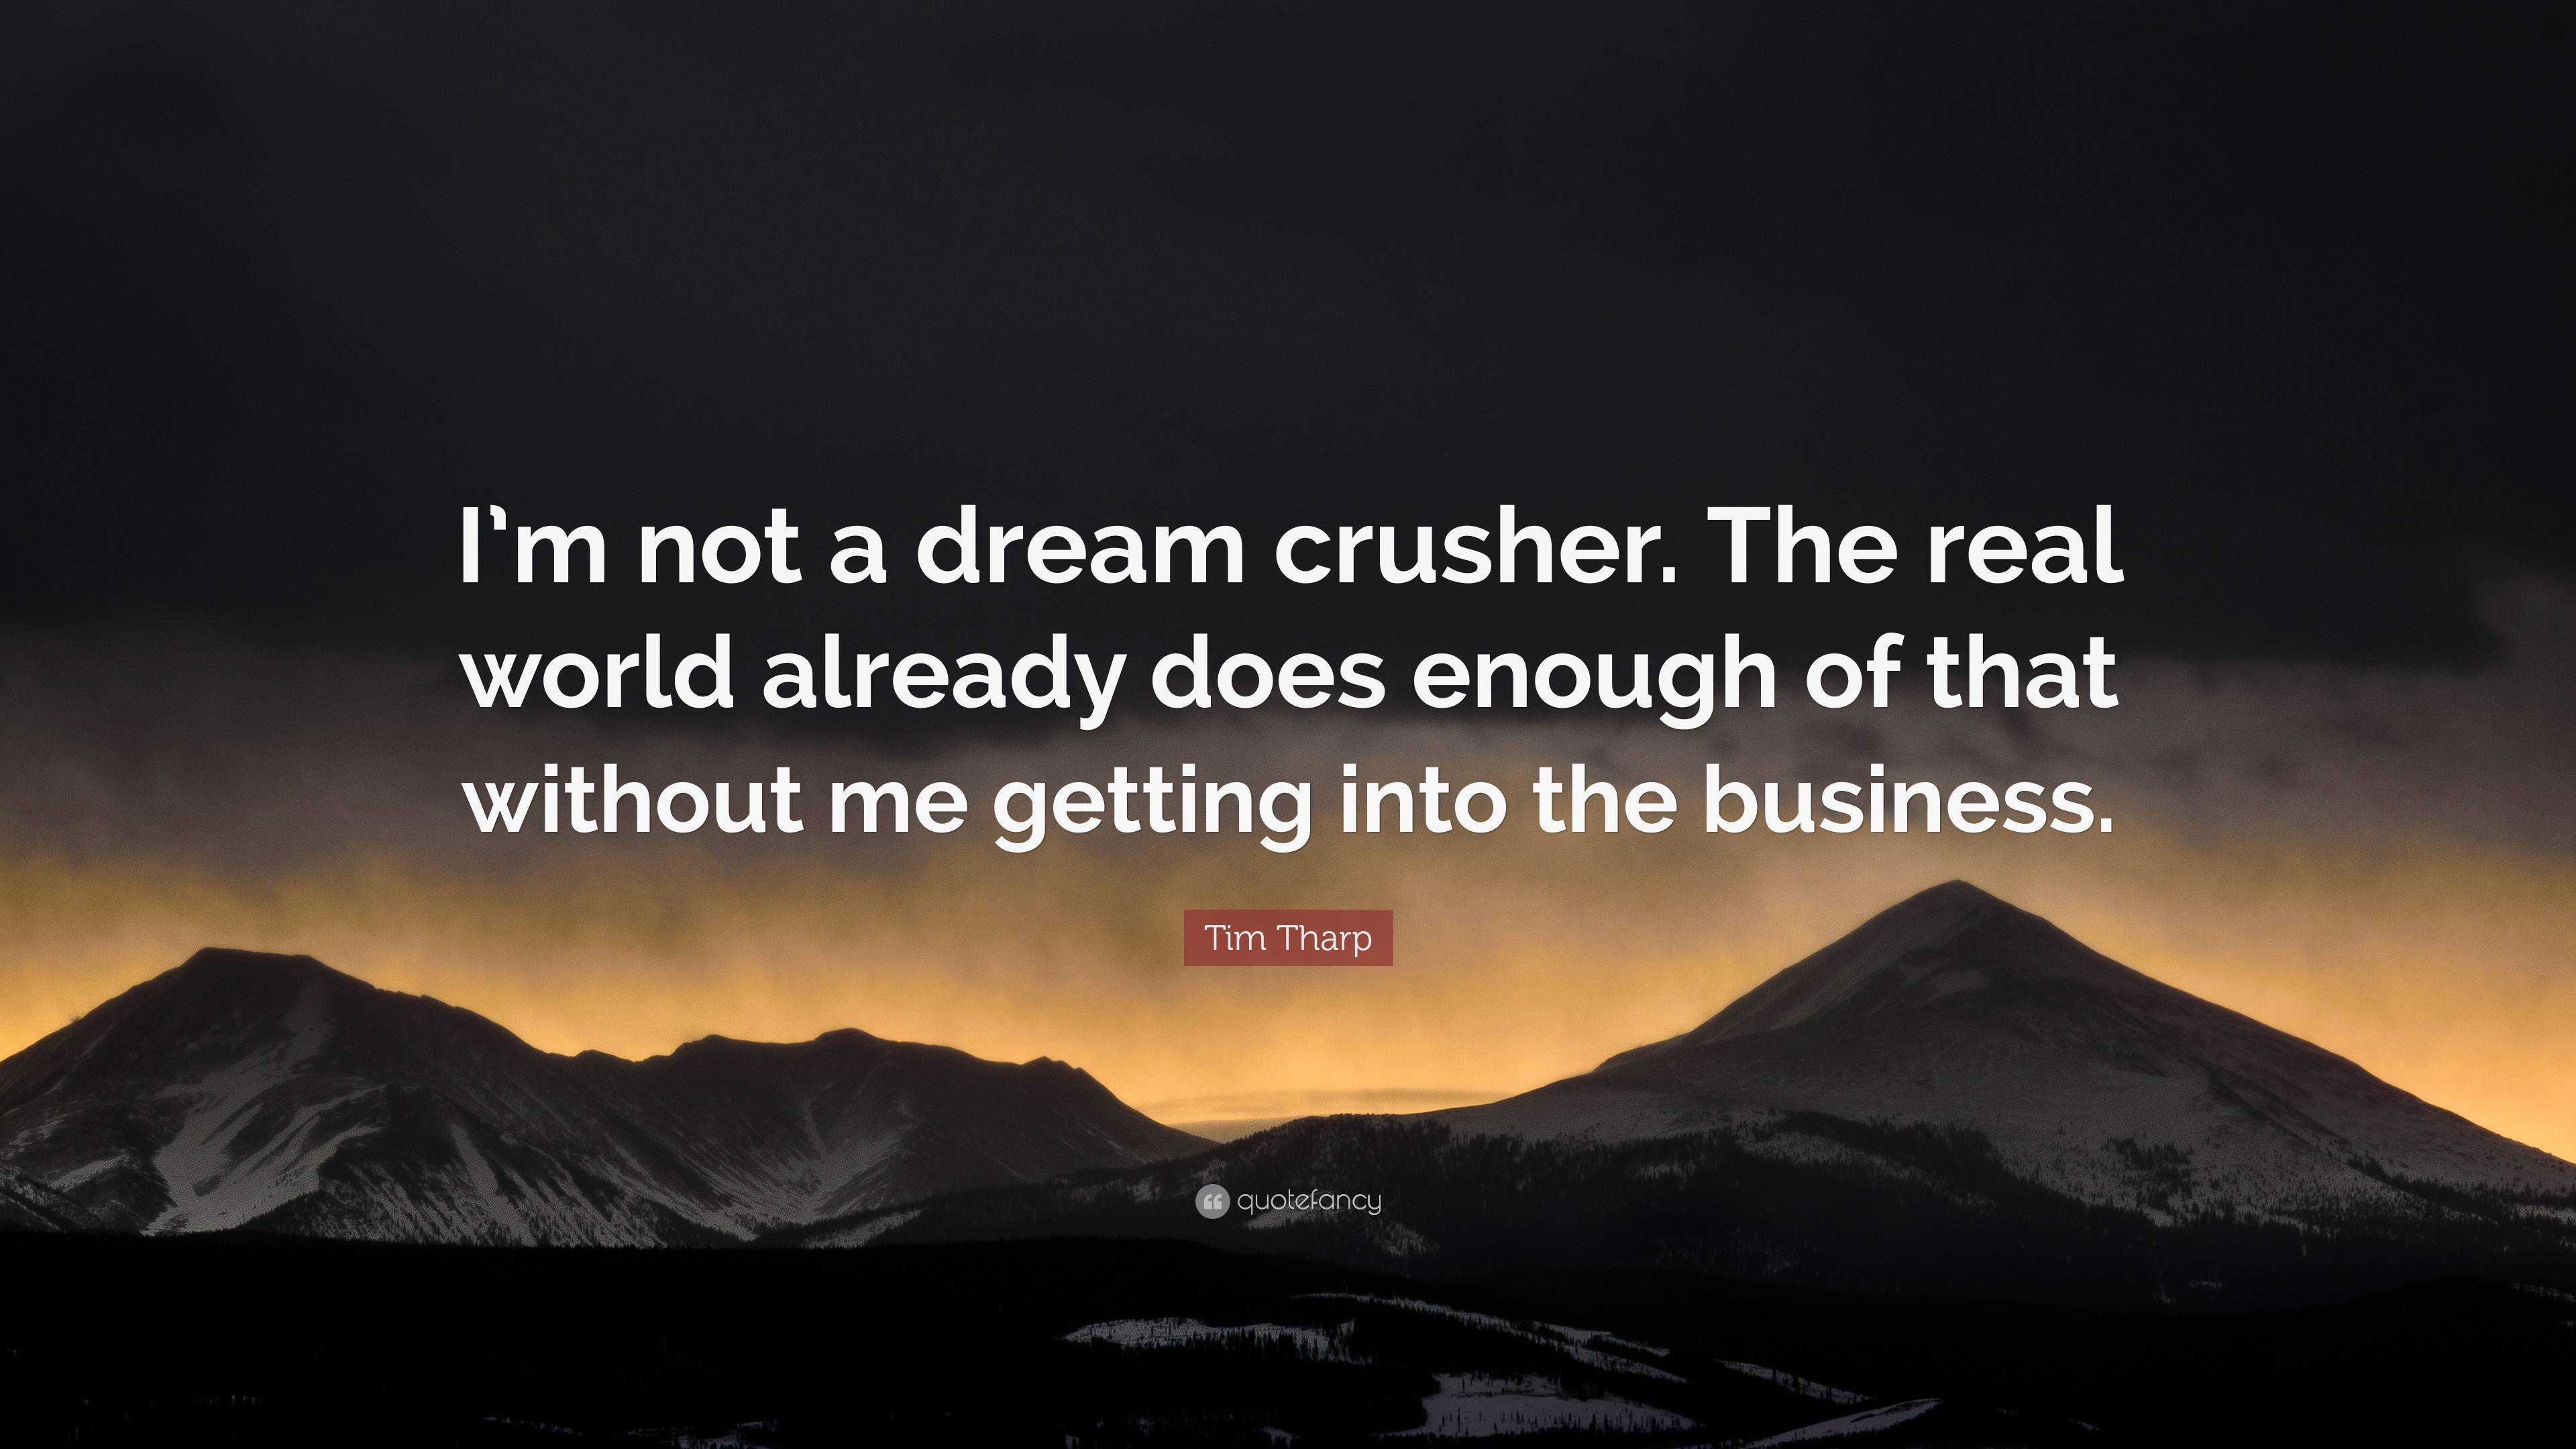 Tim Tharp Quote: “I'm not a dream crusher. The real world already